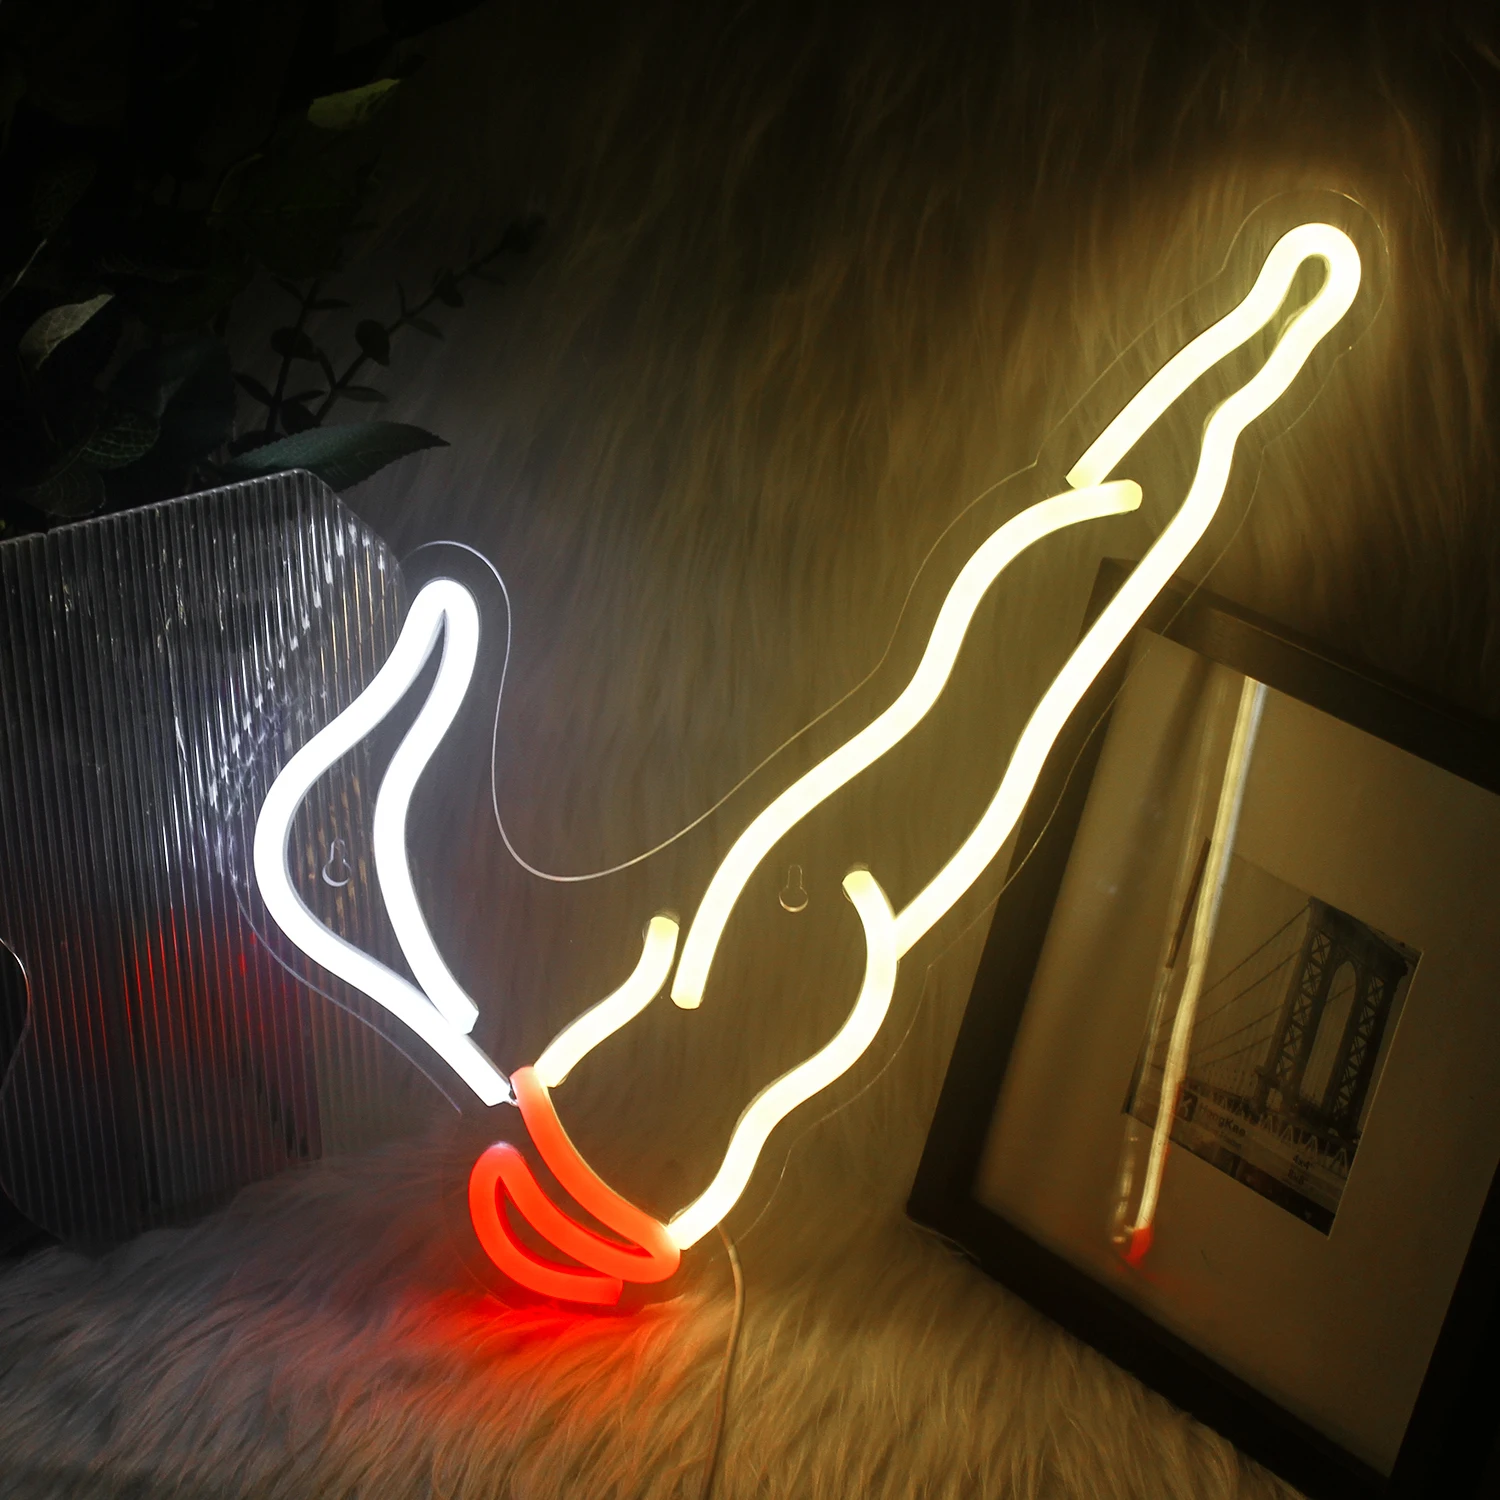 Ineonlife Smoking Cool Neon Sign LED Lighting Indoor Art Hanging Wall Decorations For Festive Party Room Bar Bedroom Restaurant led neon sign custom personalized design business signs room wall night lights birthday party wedding holiday decorations